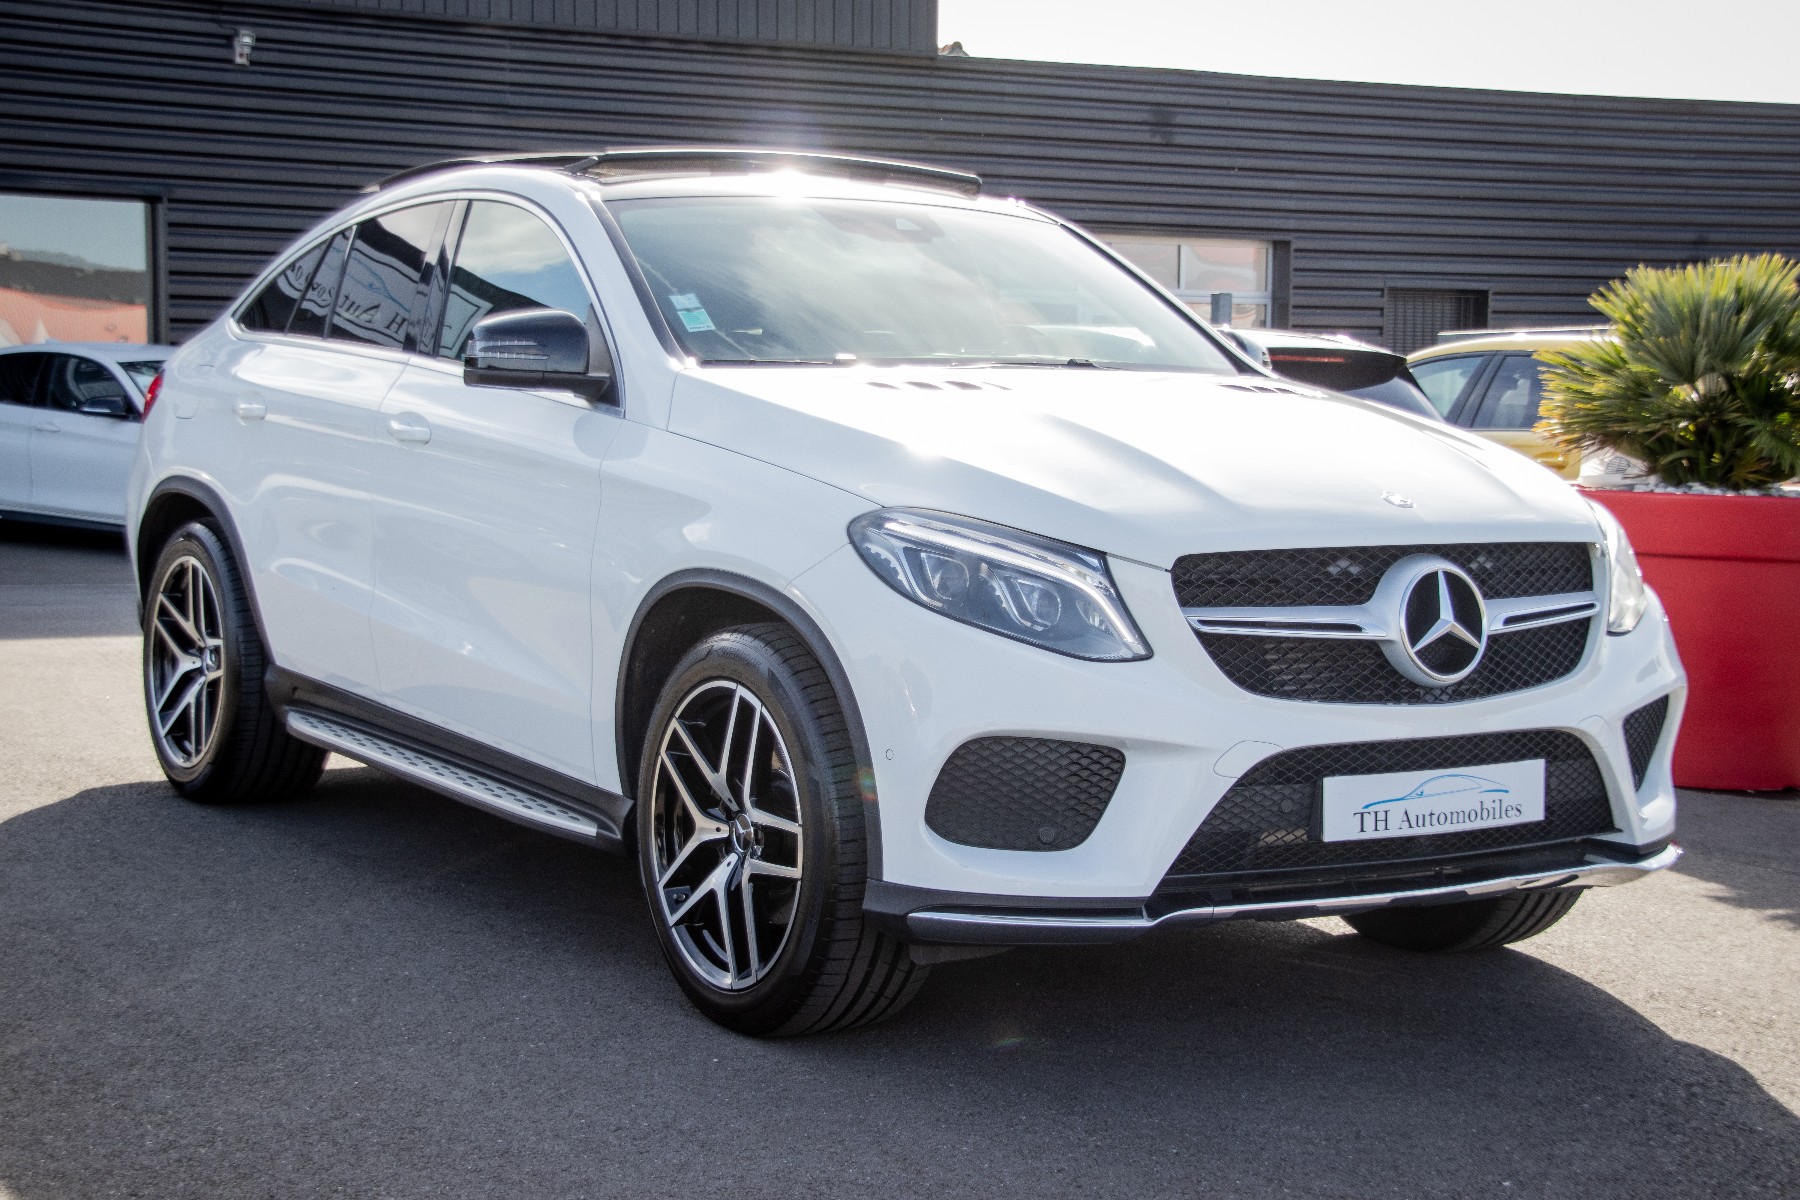 MERCEDES GLE COUPE 350D SPORTLINE 258ch 4MATIC 9G-tronic